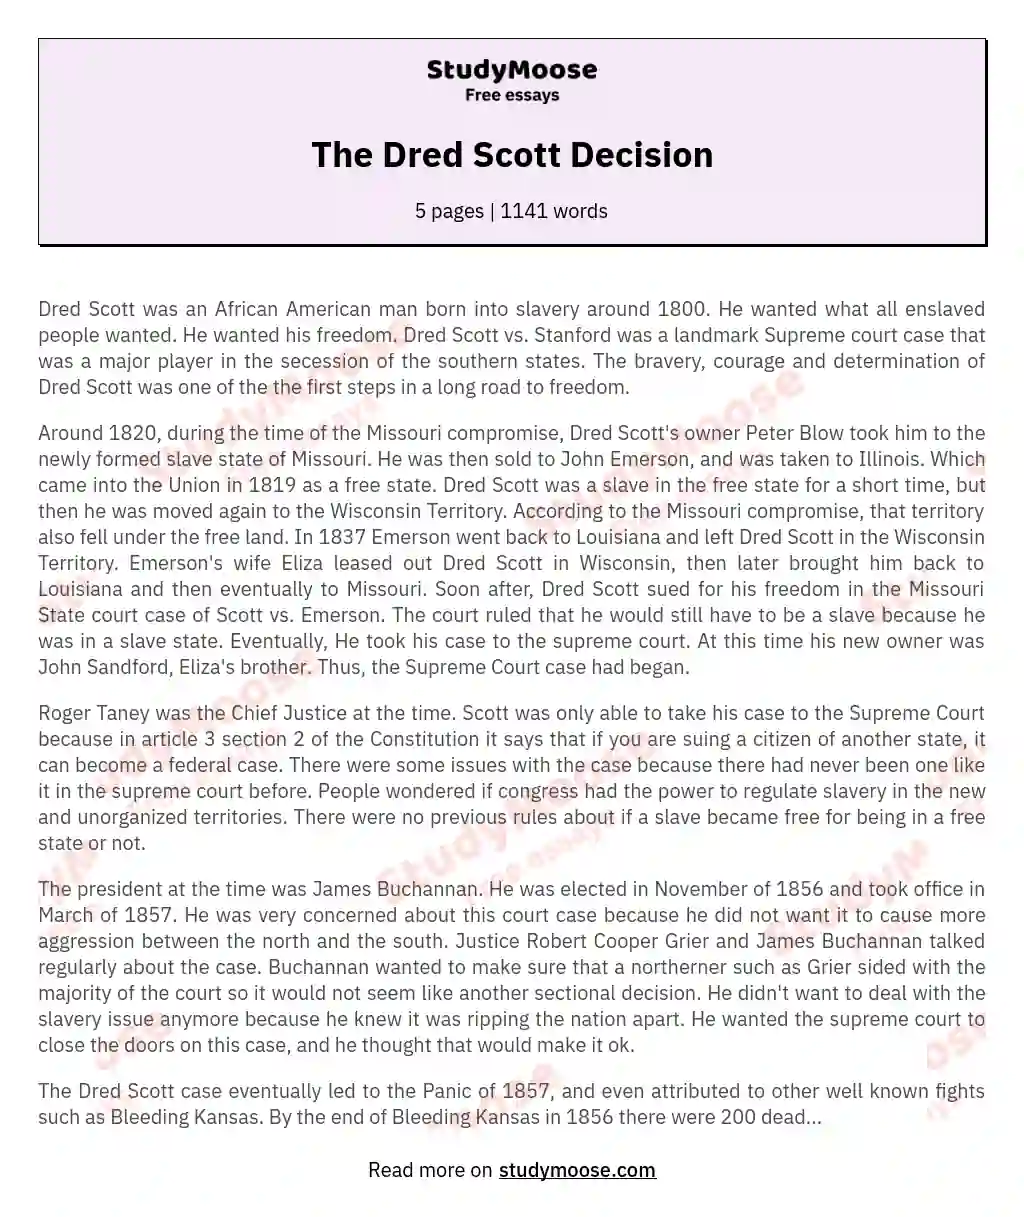 The Impact of Dred Scott vs. Stanford on American History essay